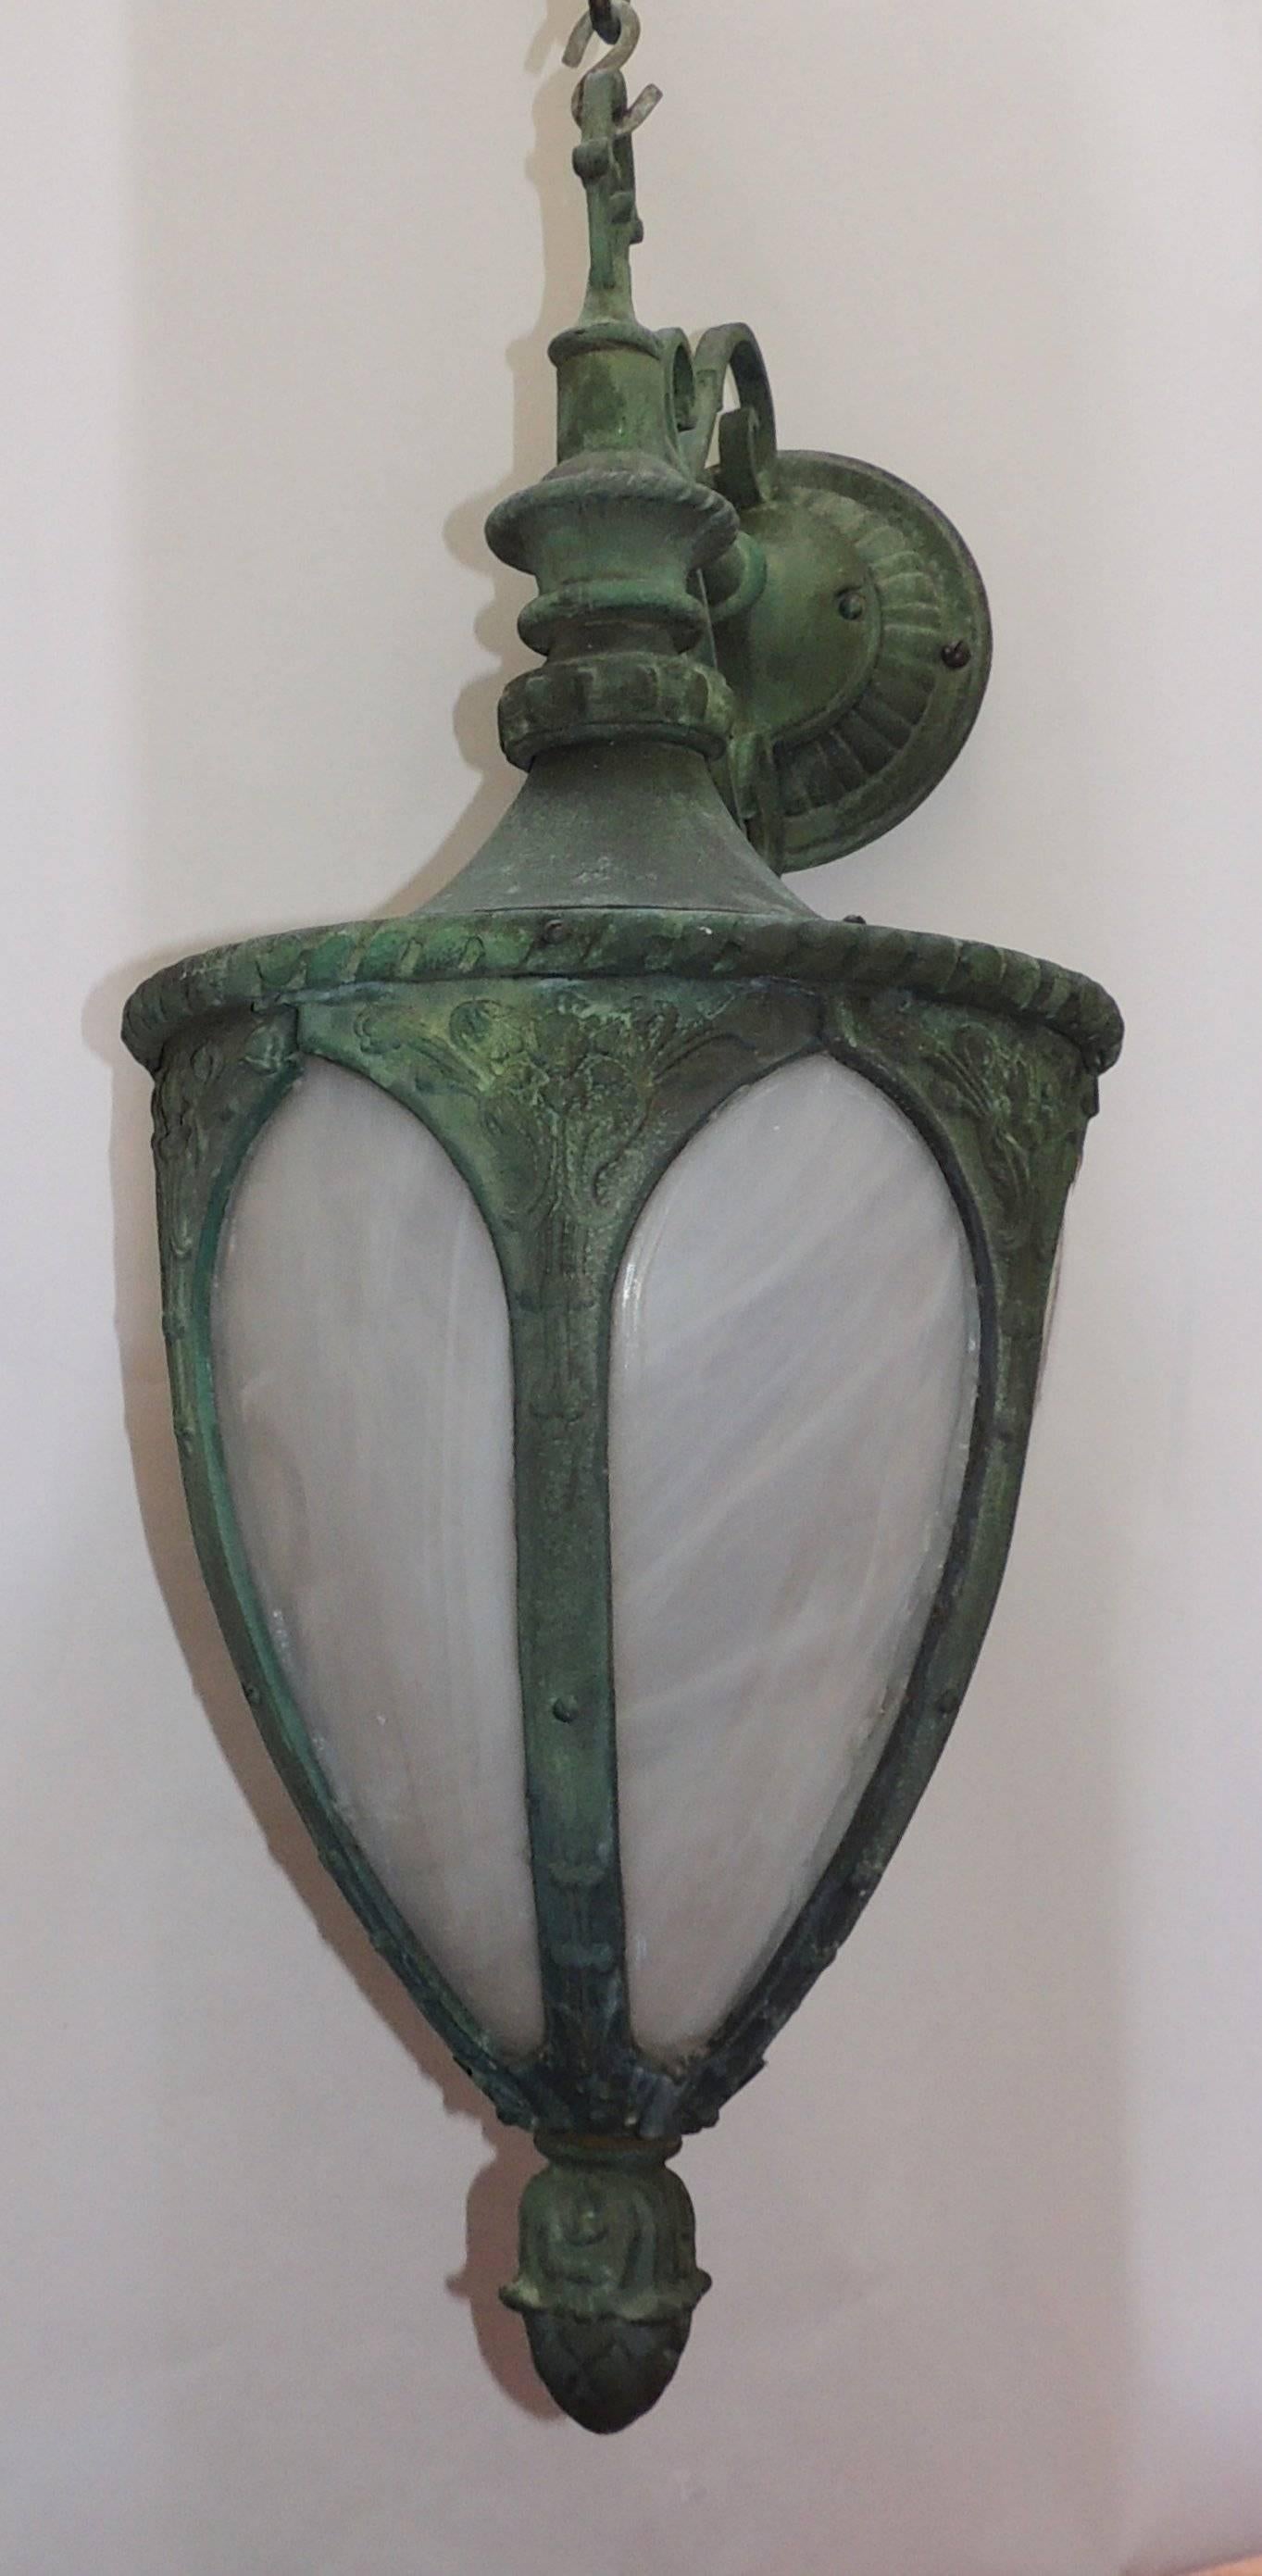 Outstanding set of four 19th century bronze green leaded glass lanterns exterior sconces. We are able to convert these into hanging lantern fixtures if you desire...

Two pairs available. 

Sold by the pair.
 
Measures: 30